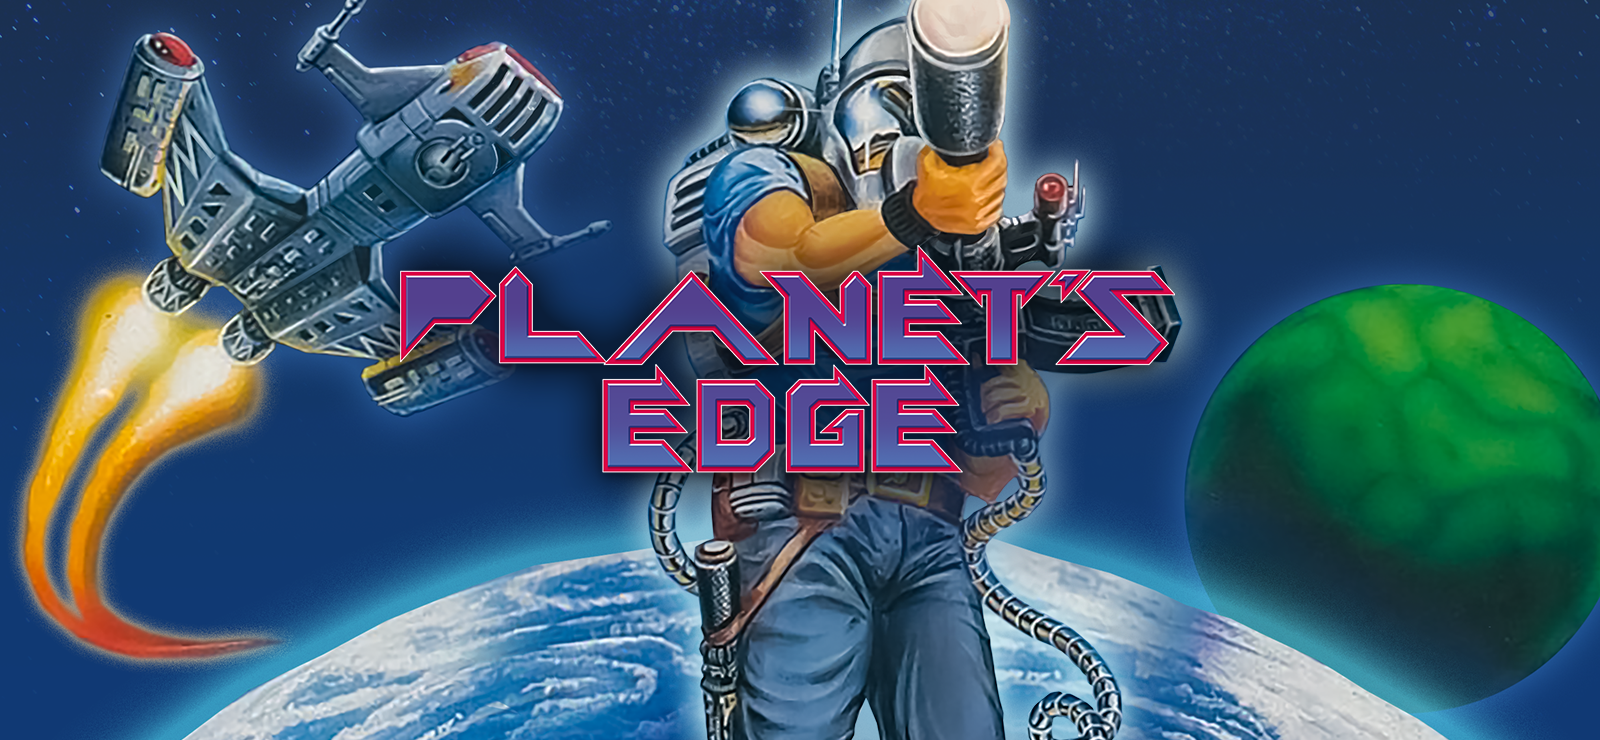 Planet's Edge: The Point Of No Return